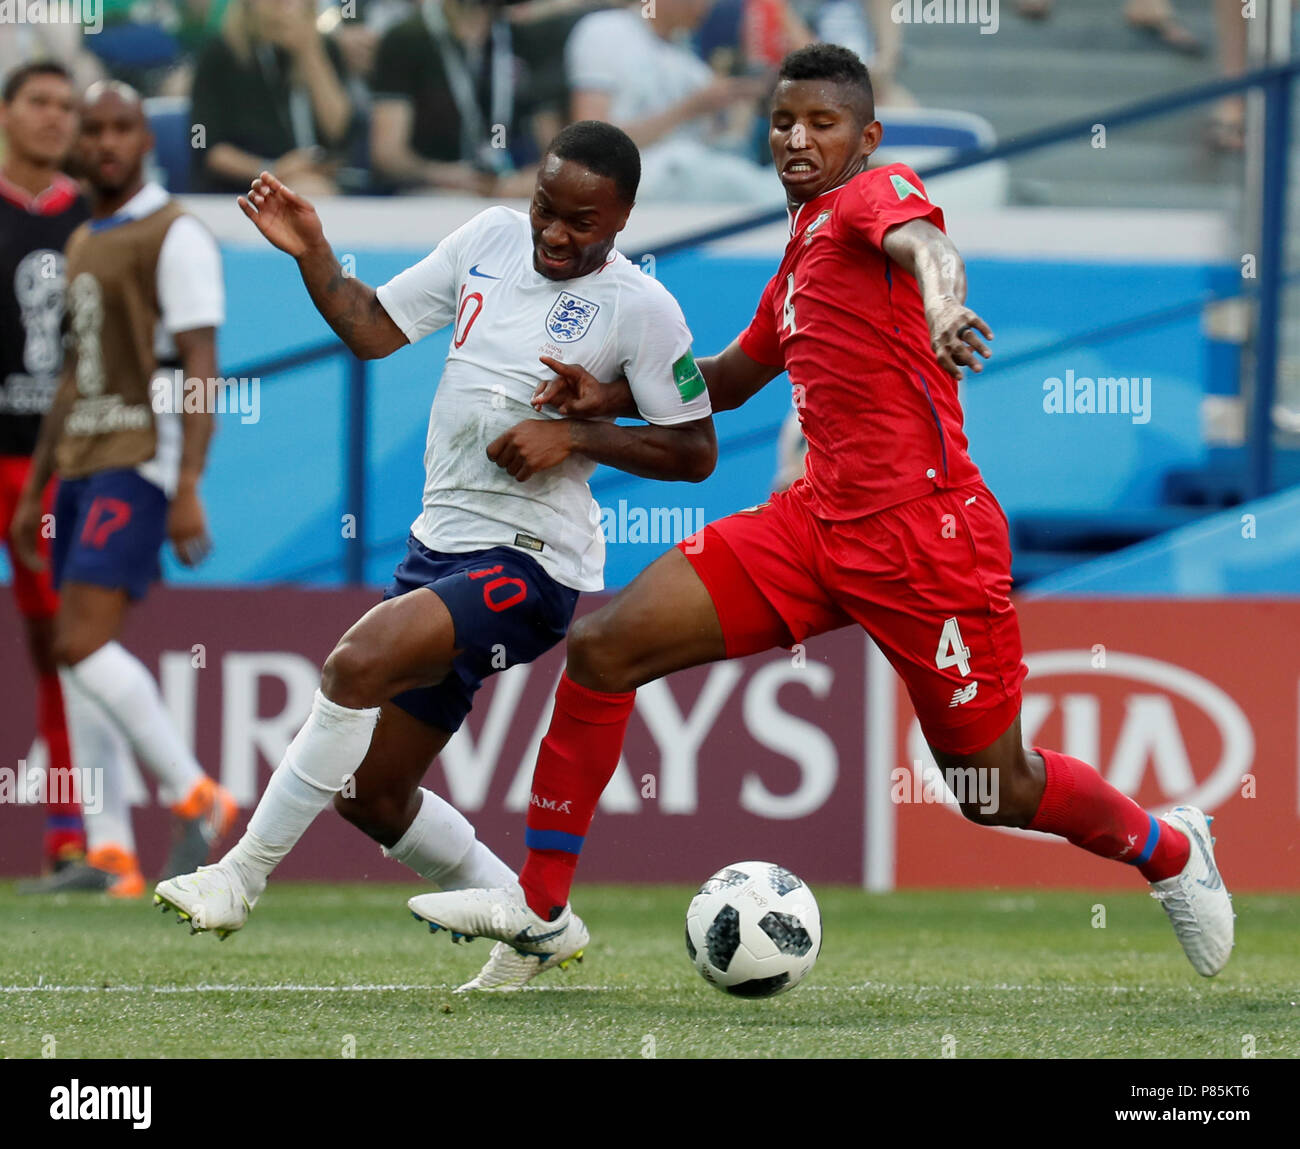 NIZHNY NOVGOROD, RUSSIA - JUNE 24: Raheem Sterling (L) of England national team and Fidel Escobar of Panama national team vie for the ball during the 2018 FIFA World Cup Russia group G match between England and Panama at Nizhny Novgorod Stadium on June 24, 2018 in Nizhny Novgorod, Russia. (MB Media) Stock Photo